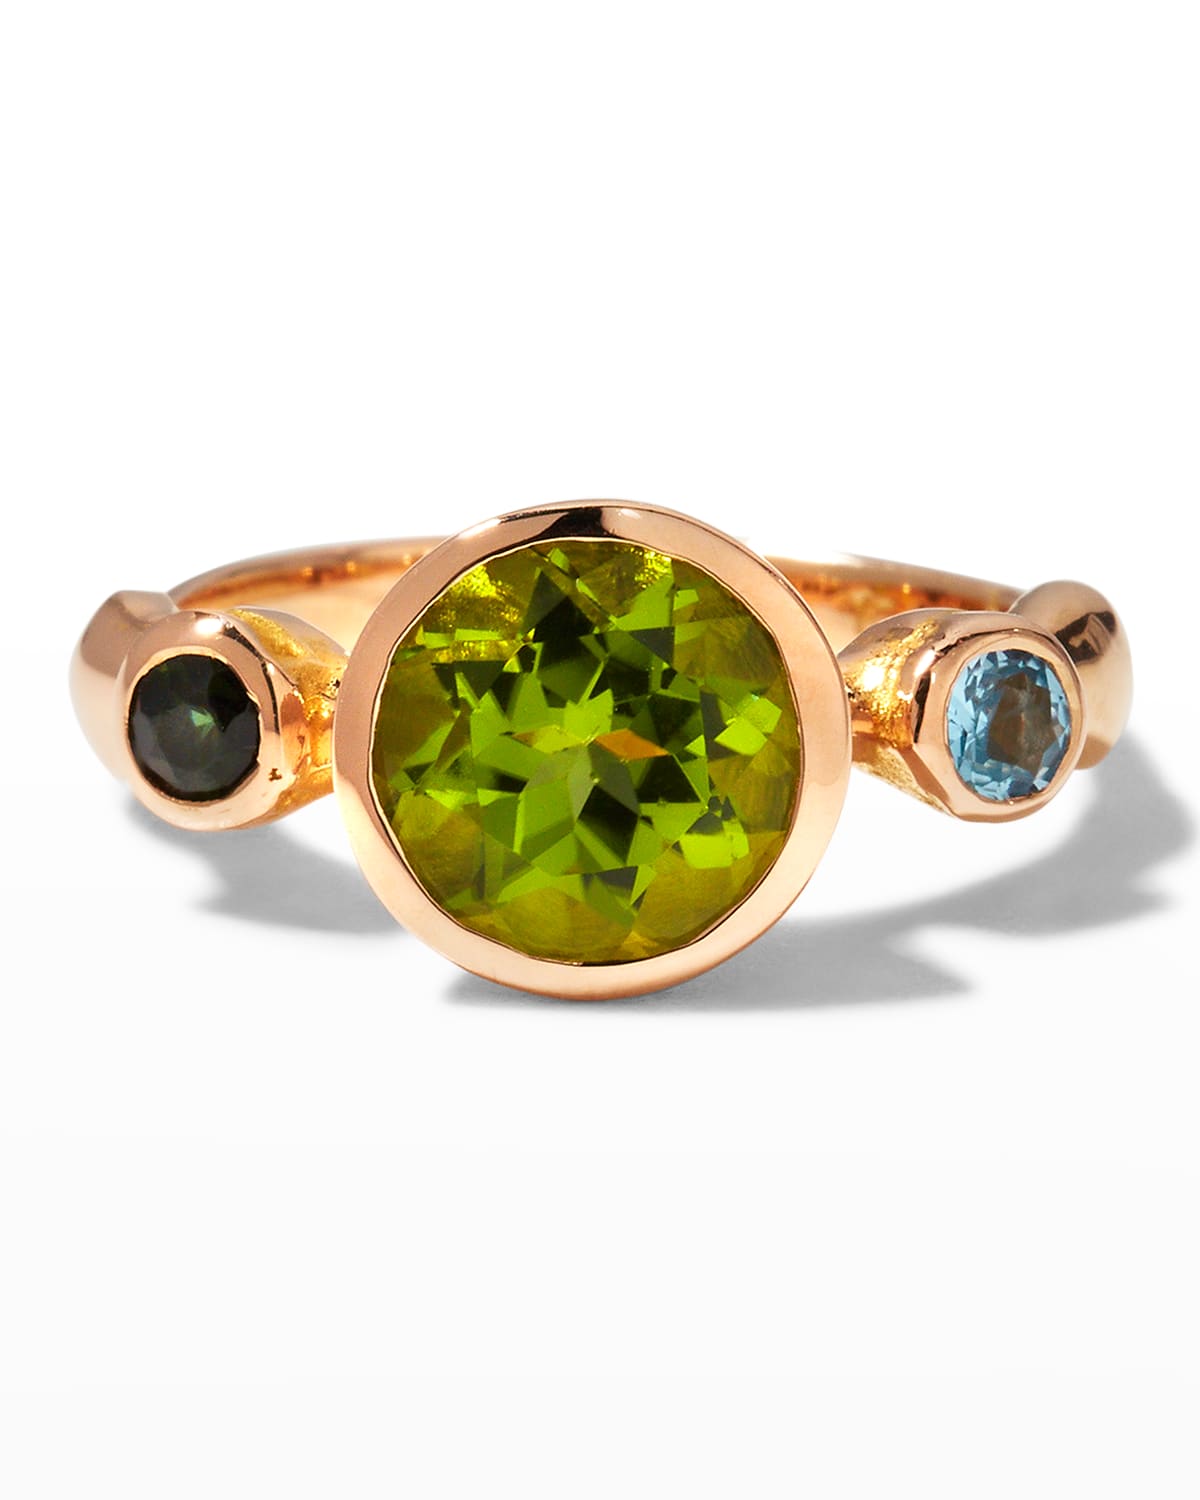 Rose Gold Sybil Ring with Peridot, Tourmaline and Topaz